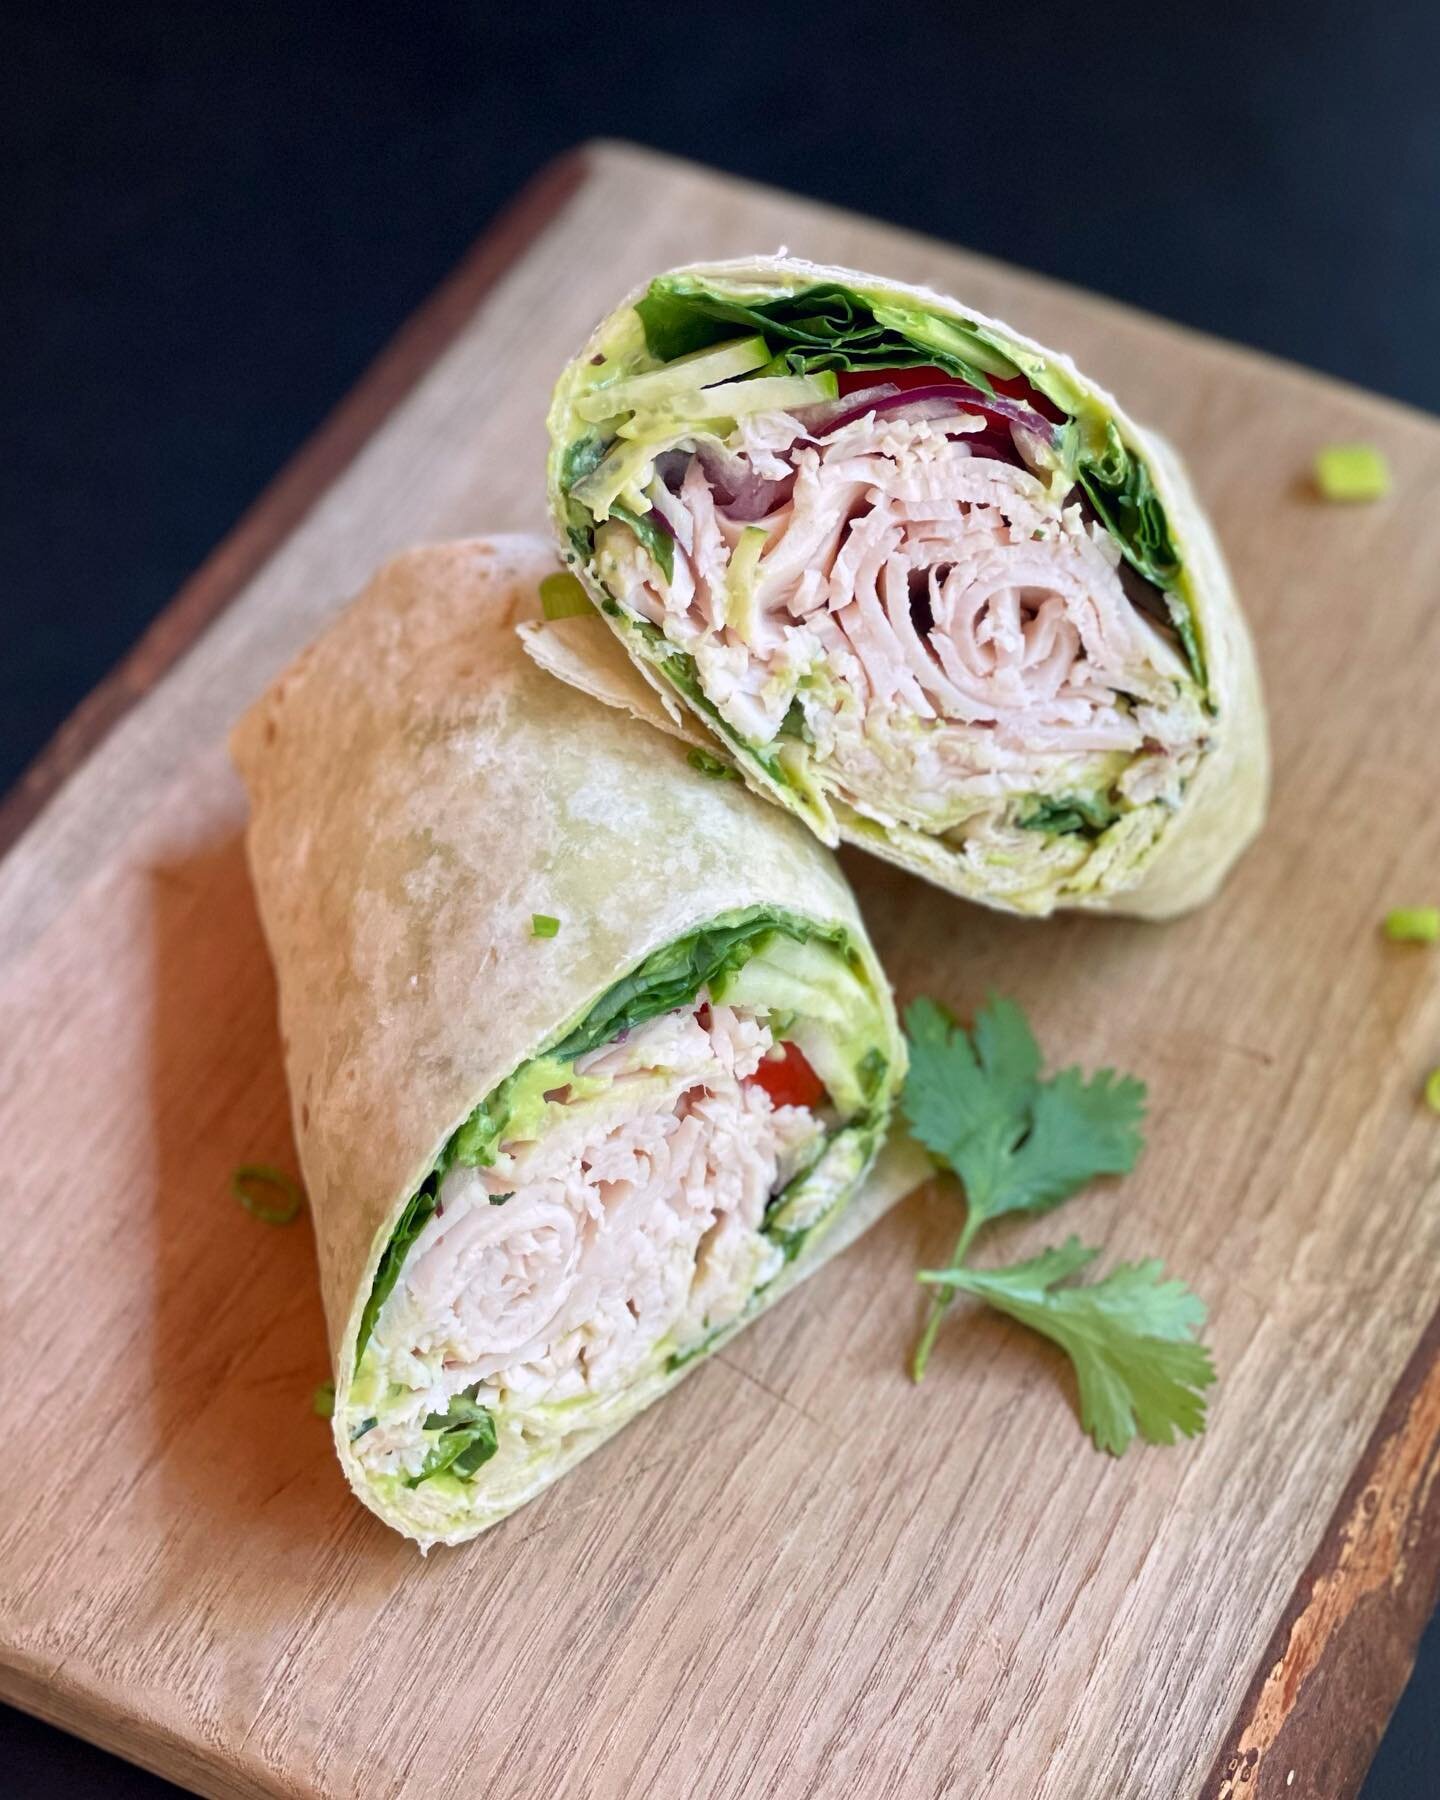 Today&rsquo;s special is an Avocado &amp; Turkey wrap with sliced turkey, creamy avocado spread, spinach, cucumber, red onion, and tomato wrapped in a flour tortilla! Soups of the moment are Vegan Curry or Chicken Noodle!
&bull;&bull;&bull;
#dailyspe